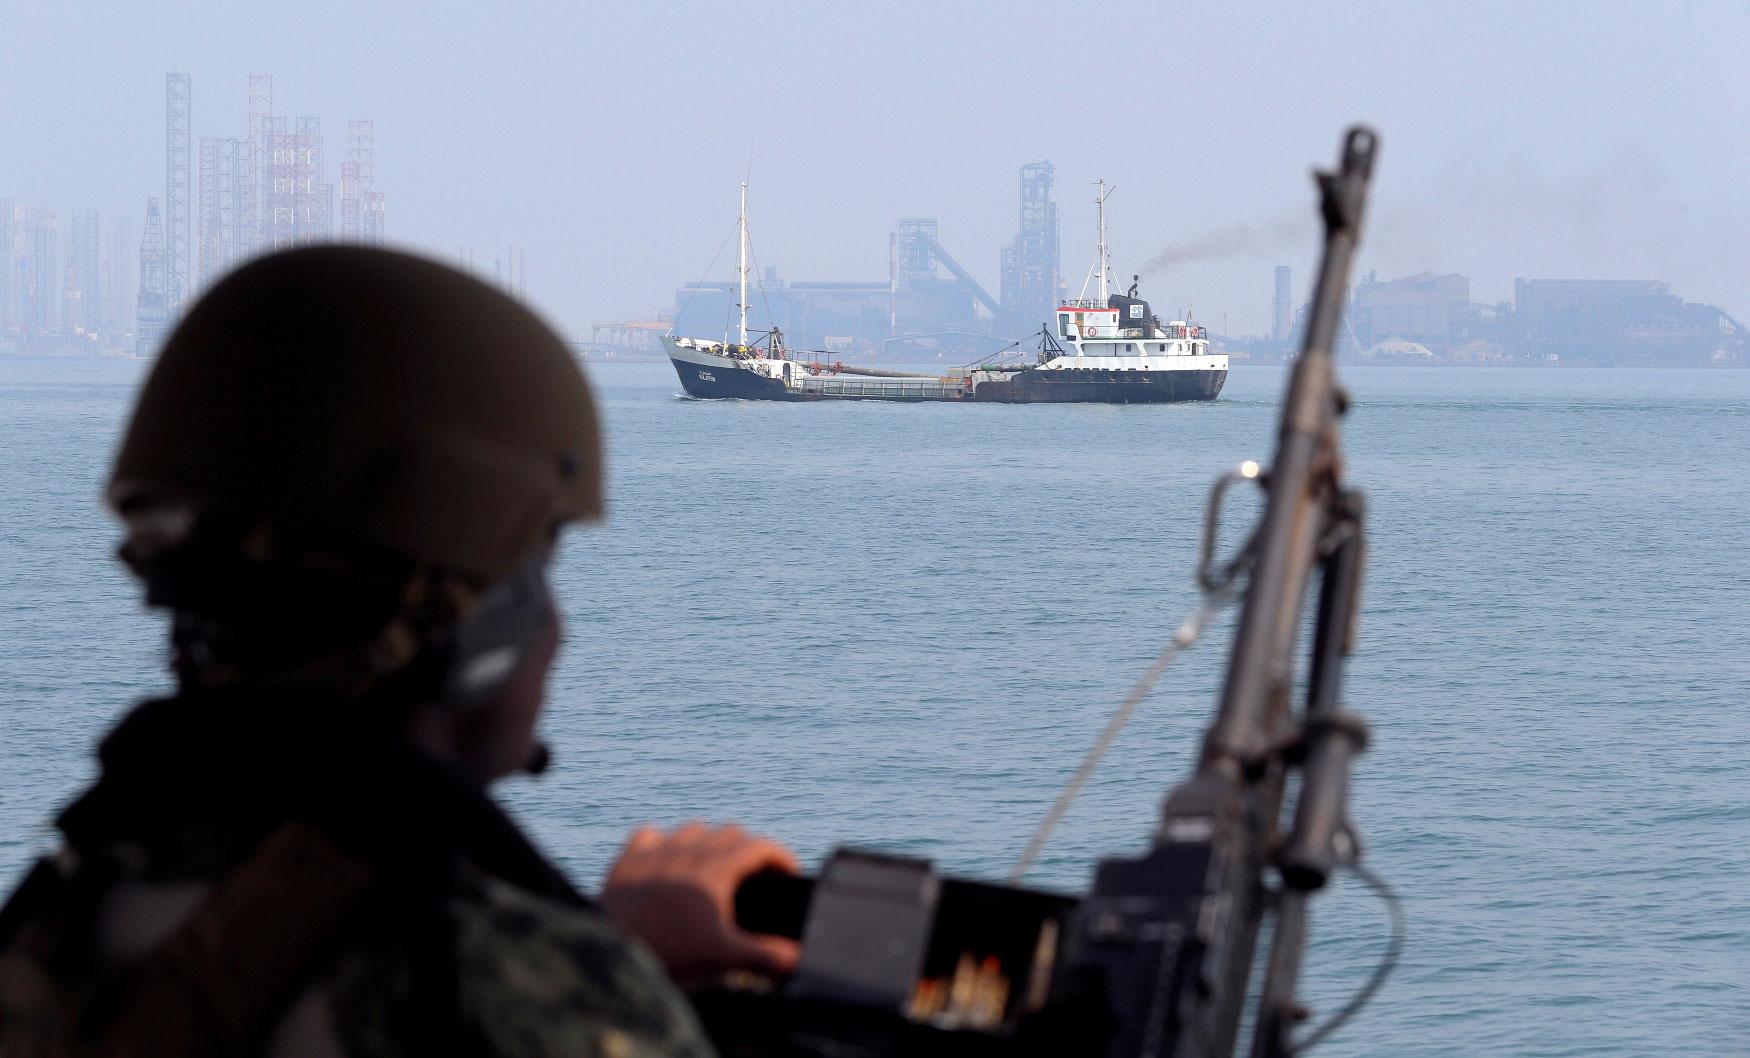 US Navy soldier stands guard as an oil tanker sails past.